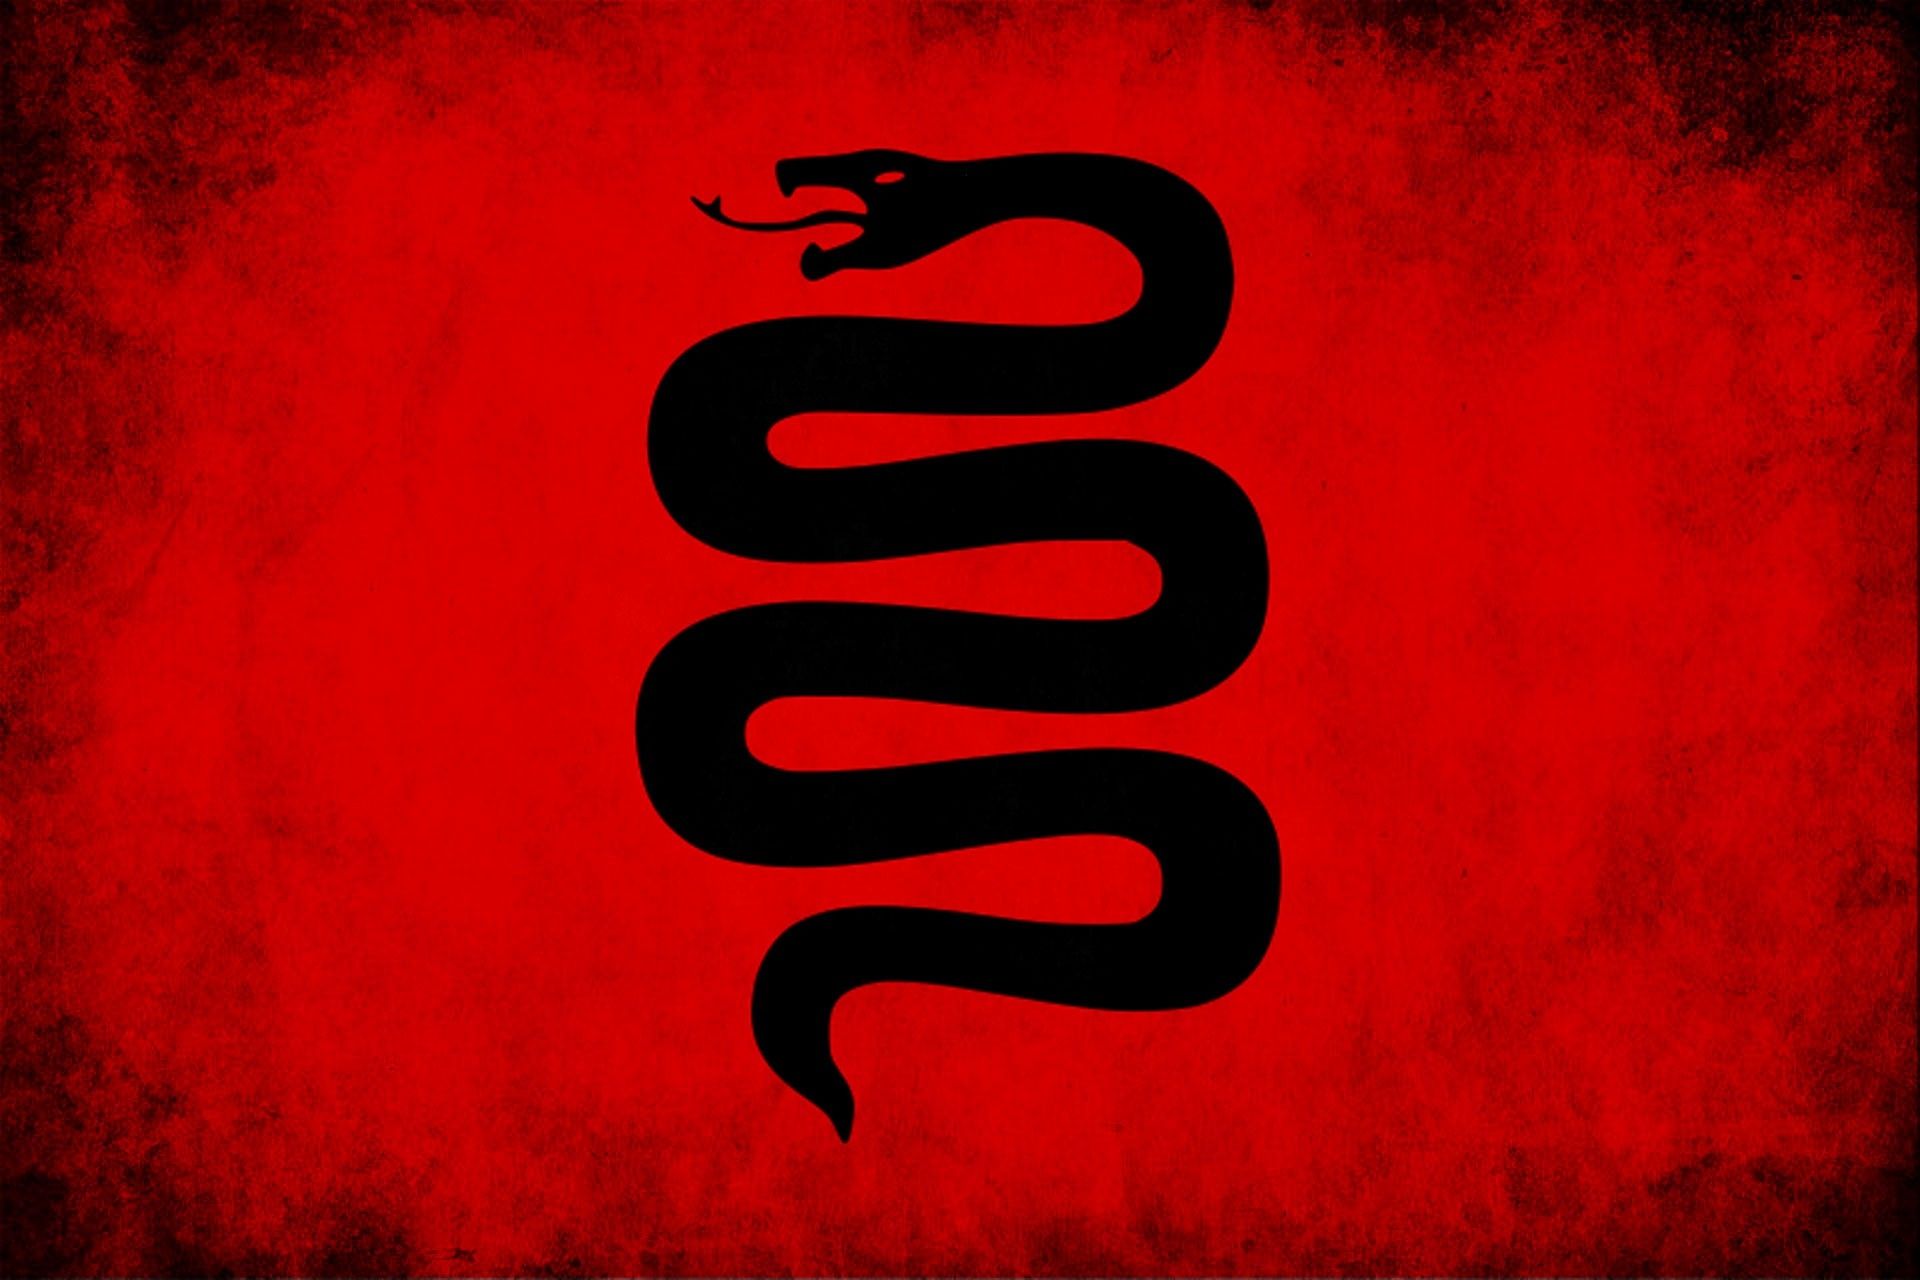 snakes the lord of the rings flags simple background red background 1920x1280 wallpaper High Quality Wallpaper, High Definition Wallpaper